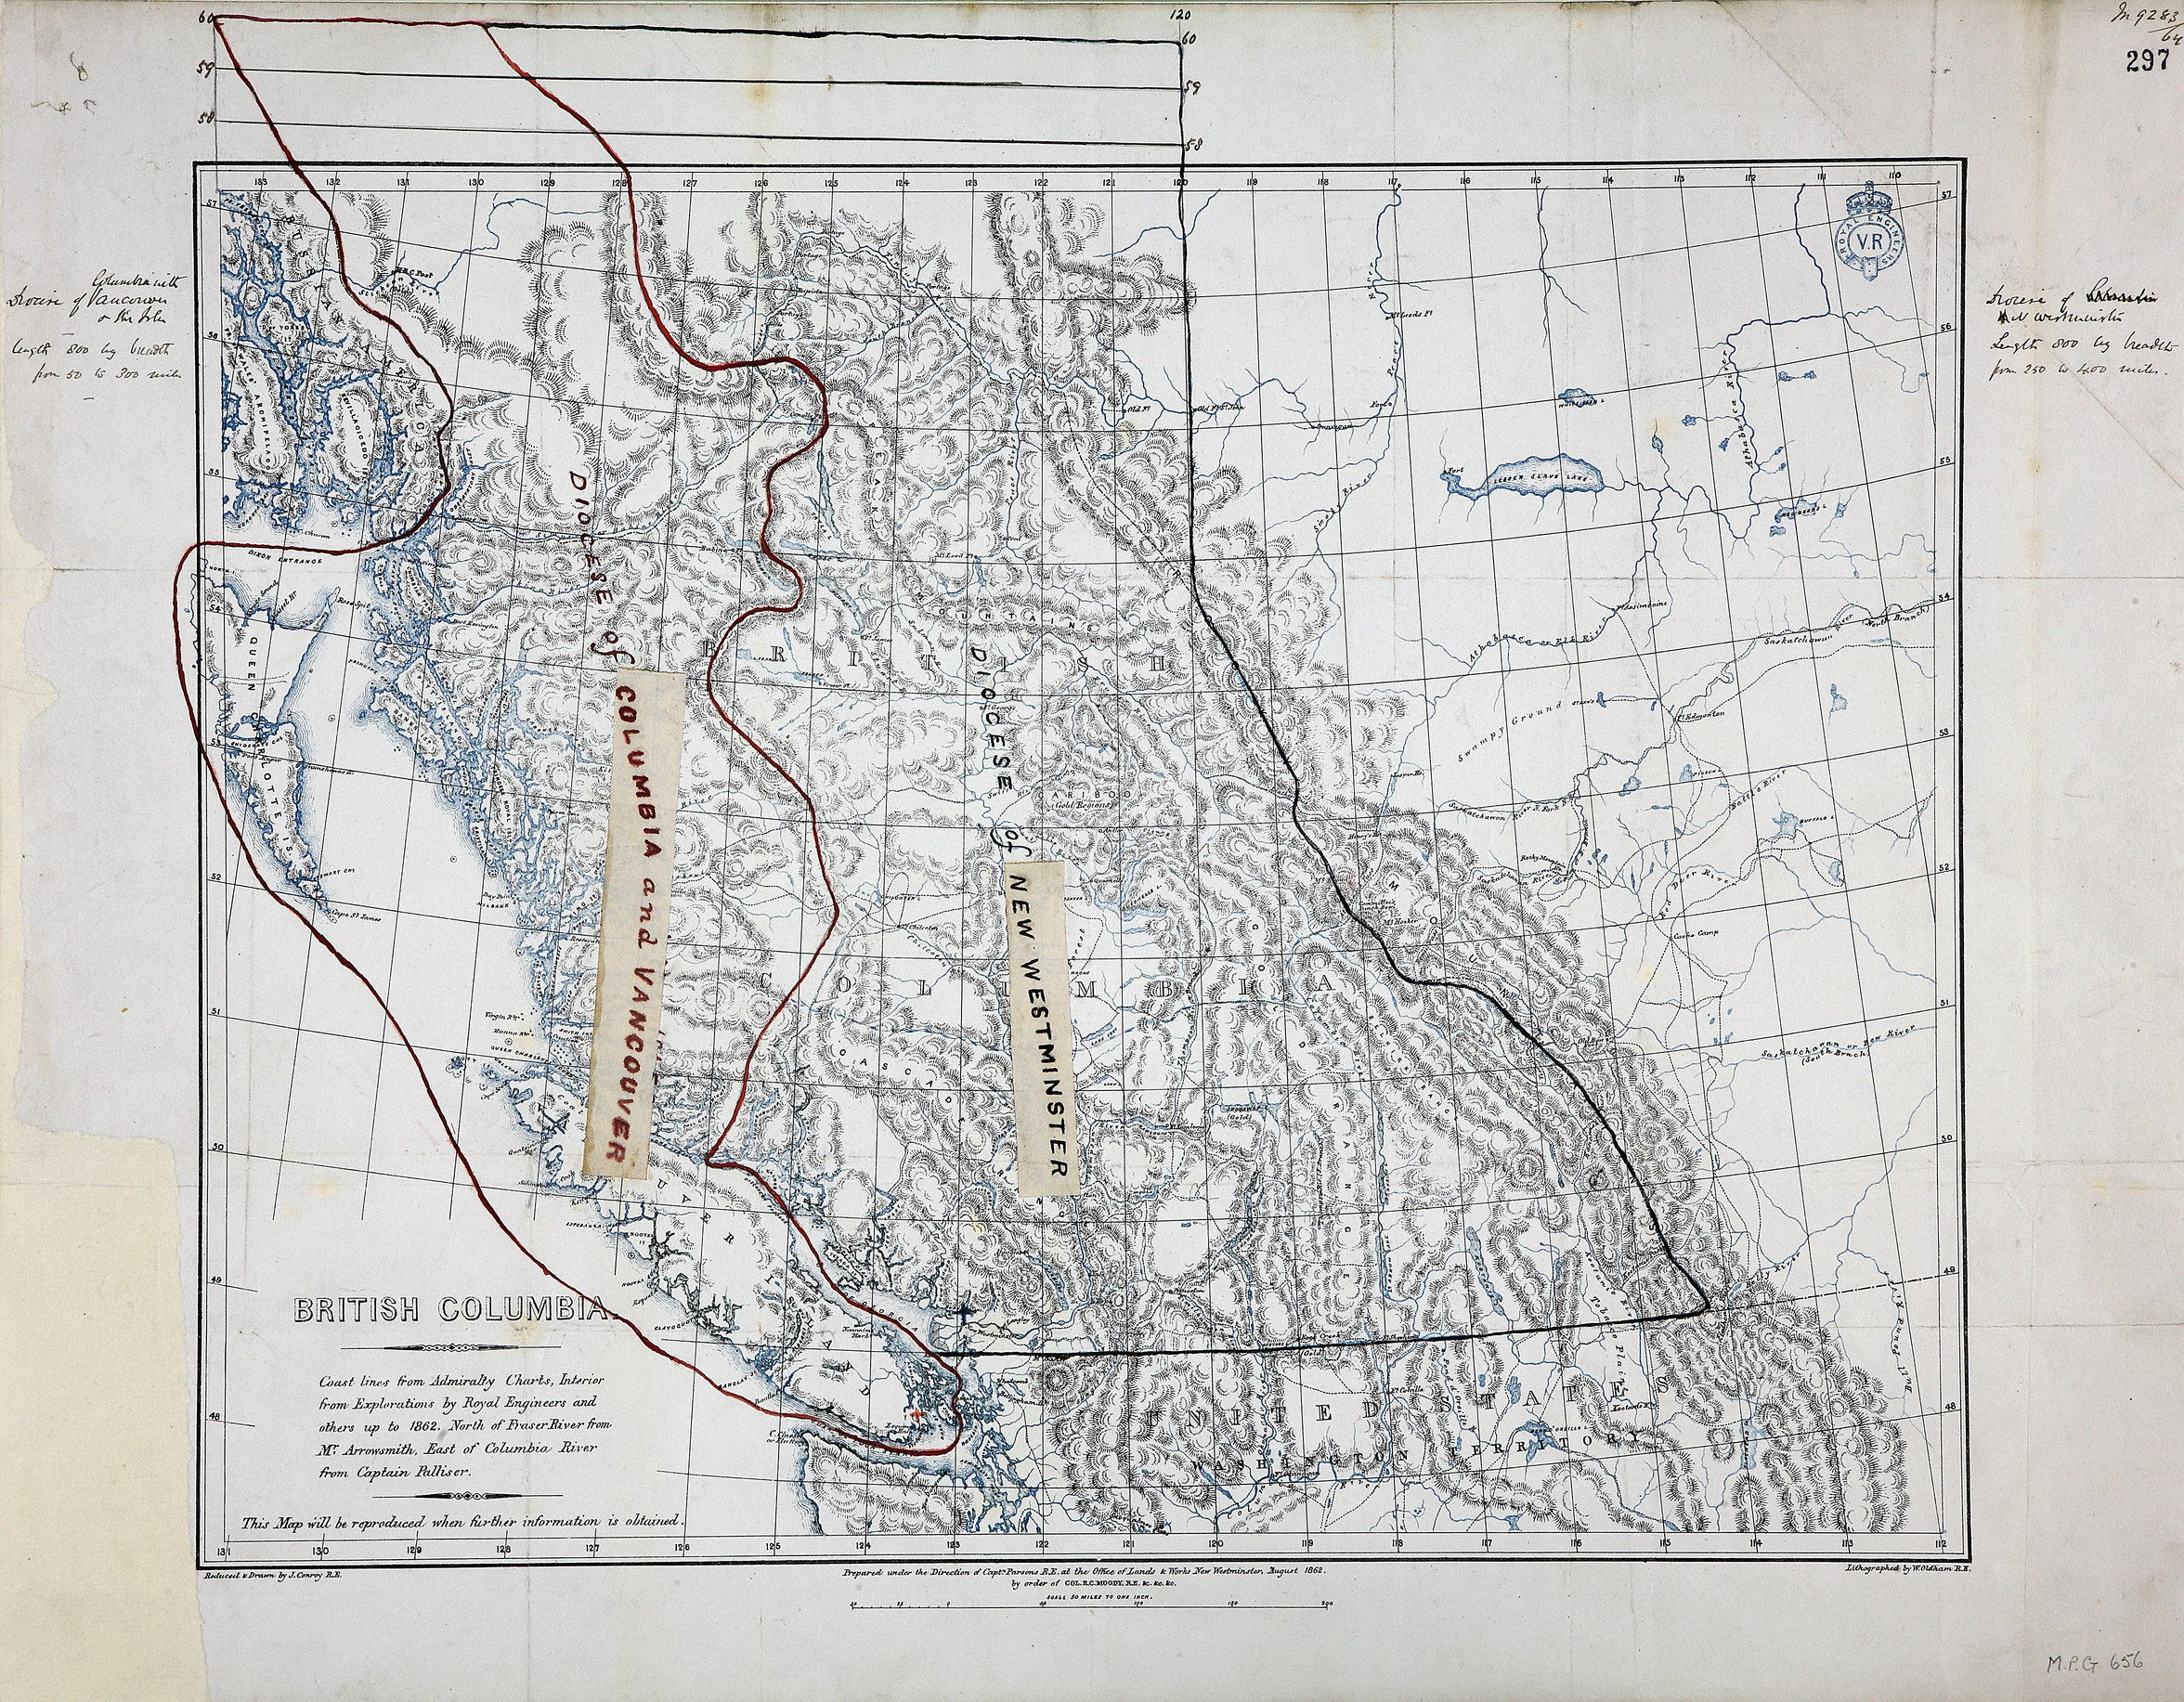 British Columbia. Coast lines from Admiralty Charts, interior from Explorations by Royal Engineers and others up to 1862. North of Fraser River from Mr. Arrowsmith. East of Columbia River from Captain Palliser.